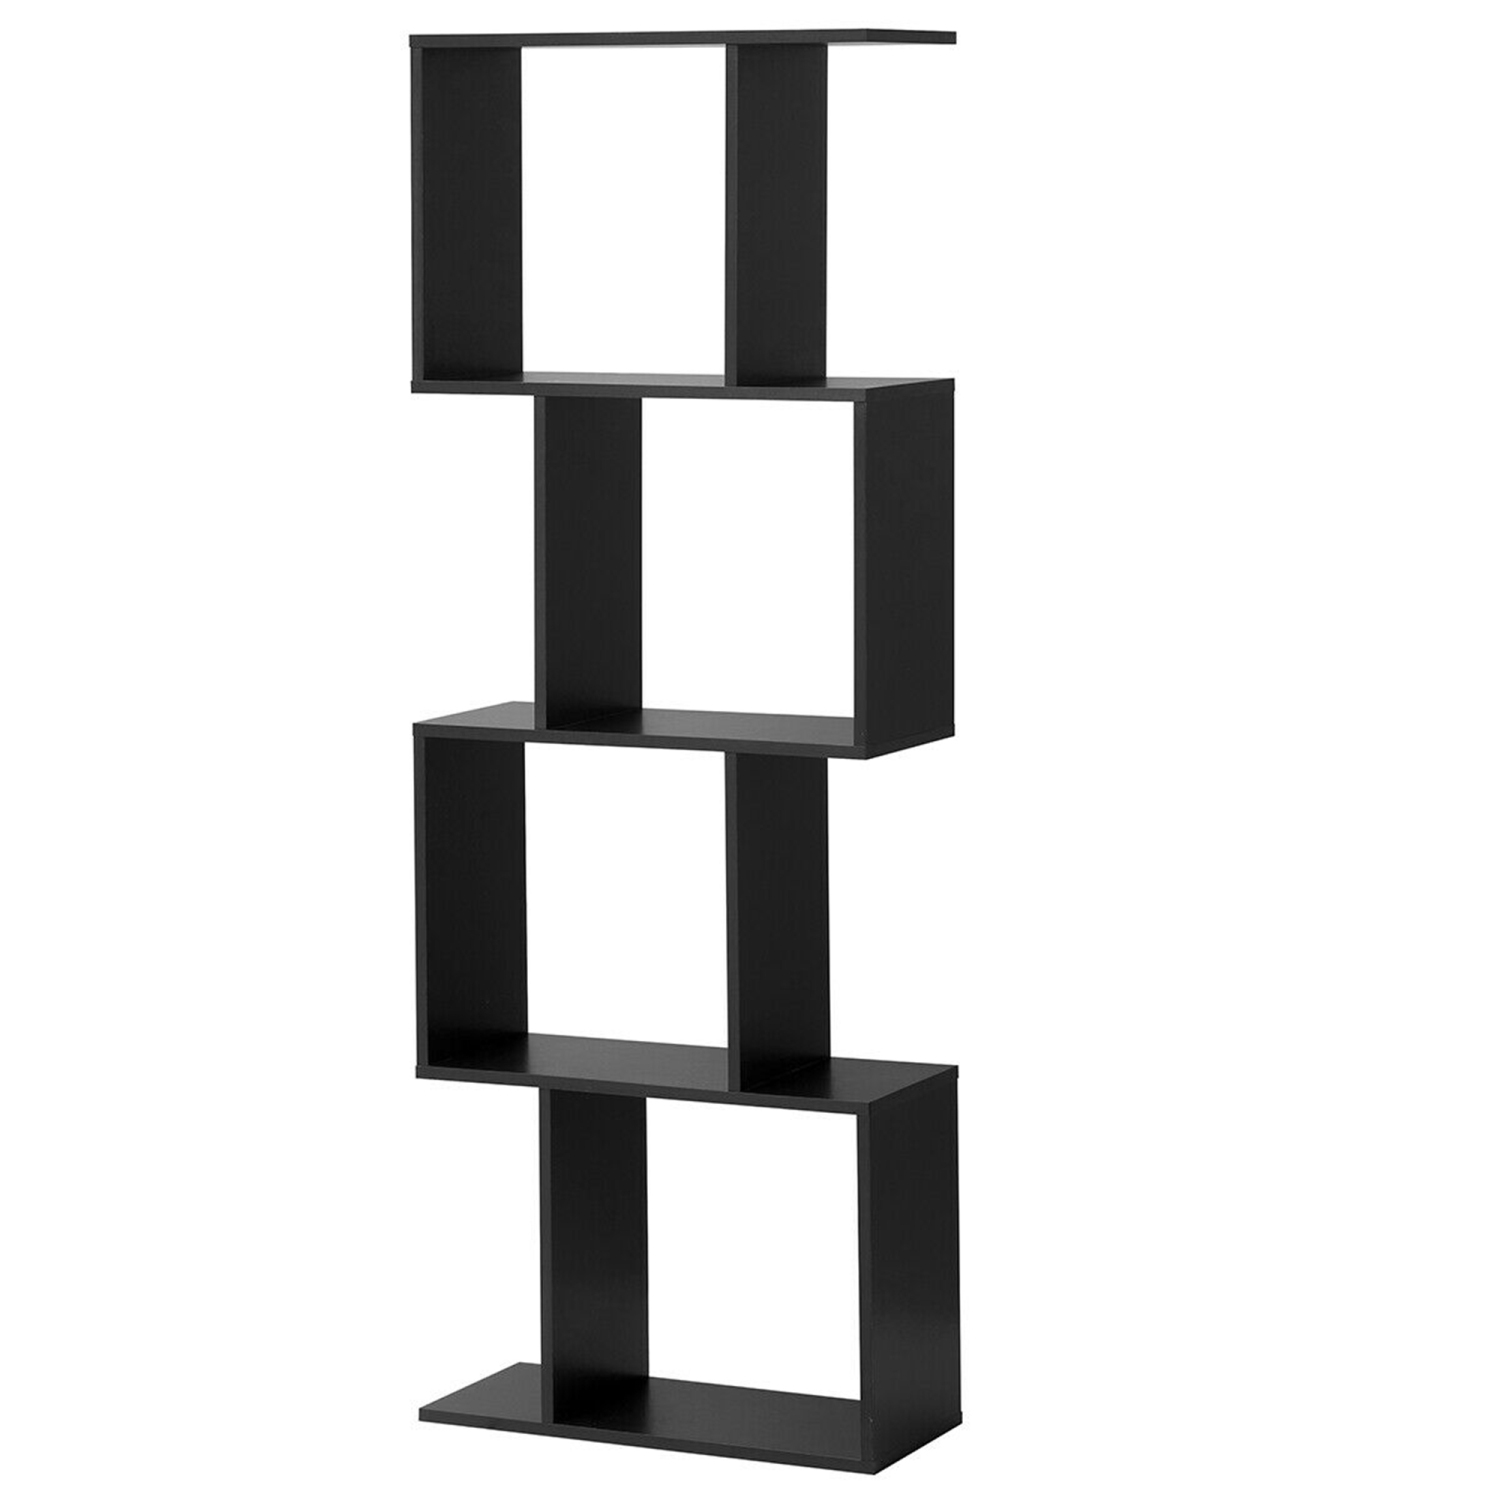 Gymax 4-tier S-Shaped Bookcase Free Standing Storage Rack Wooden Display Decor Black